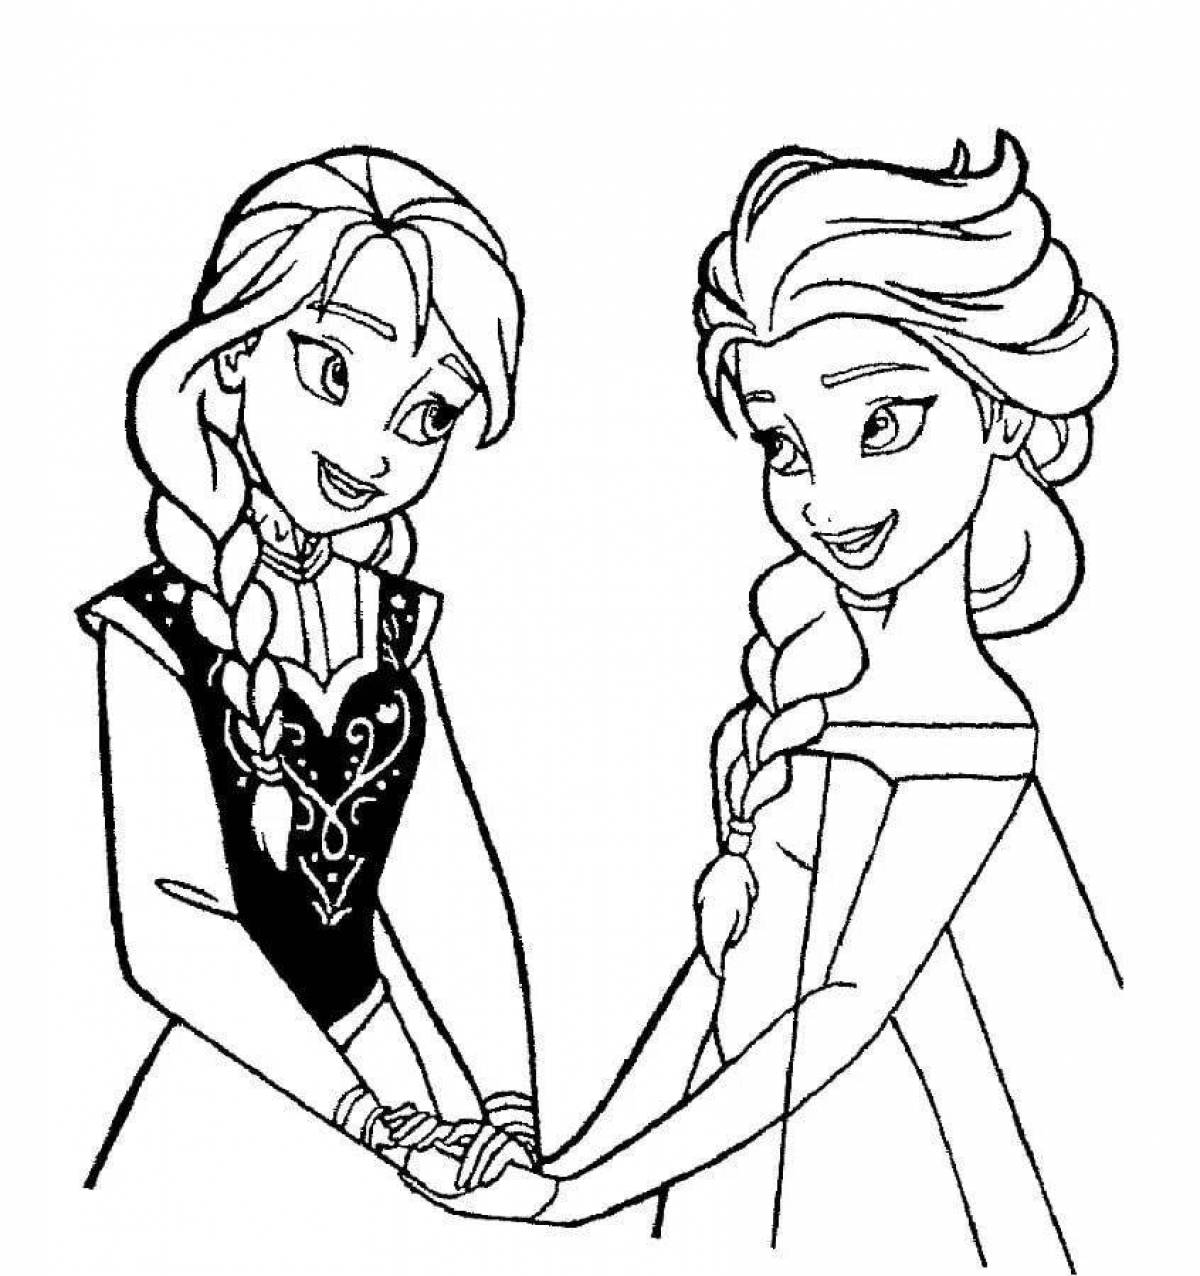 Elsa and anna in good quality #5